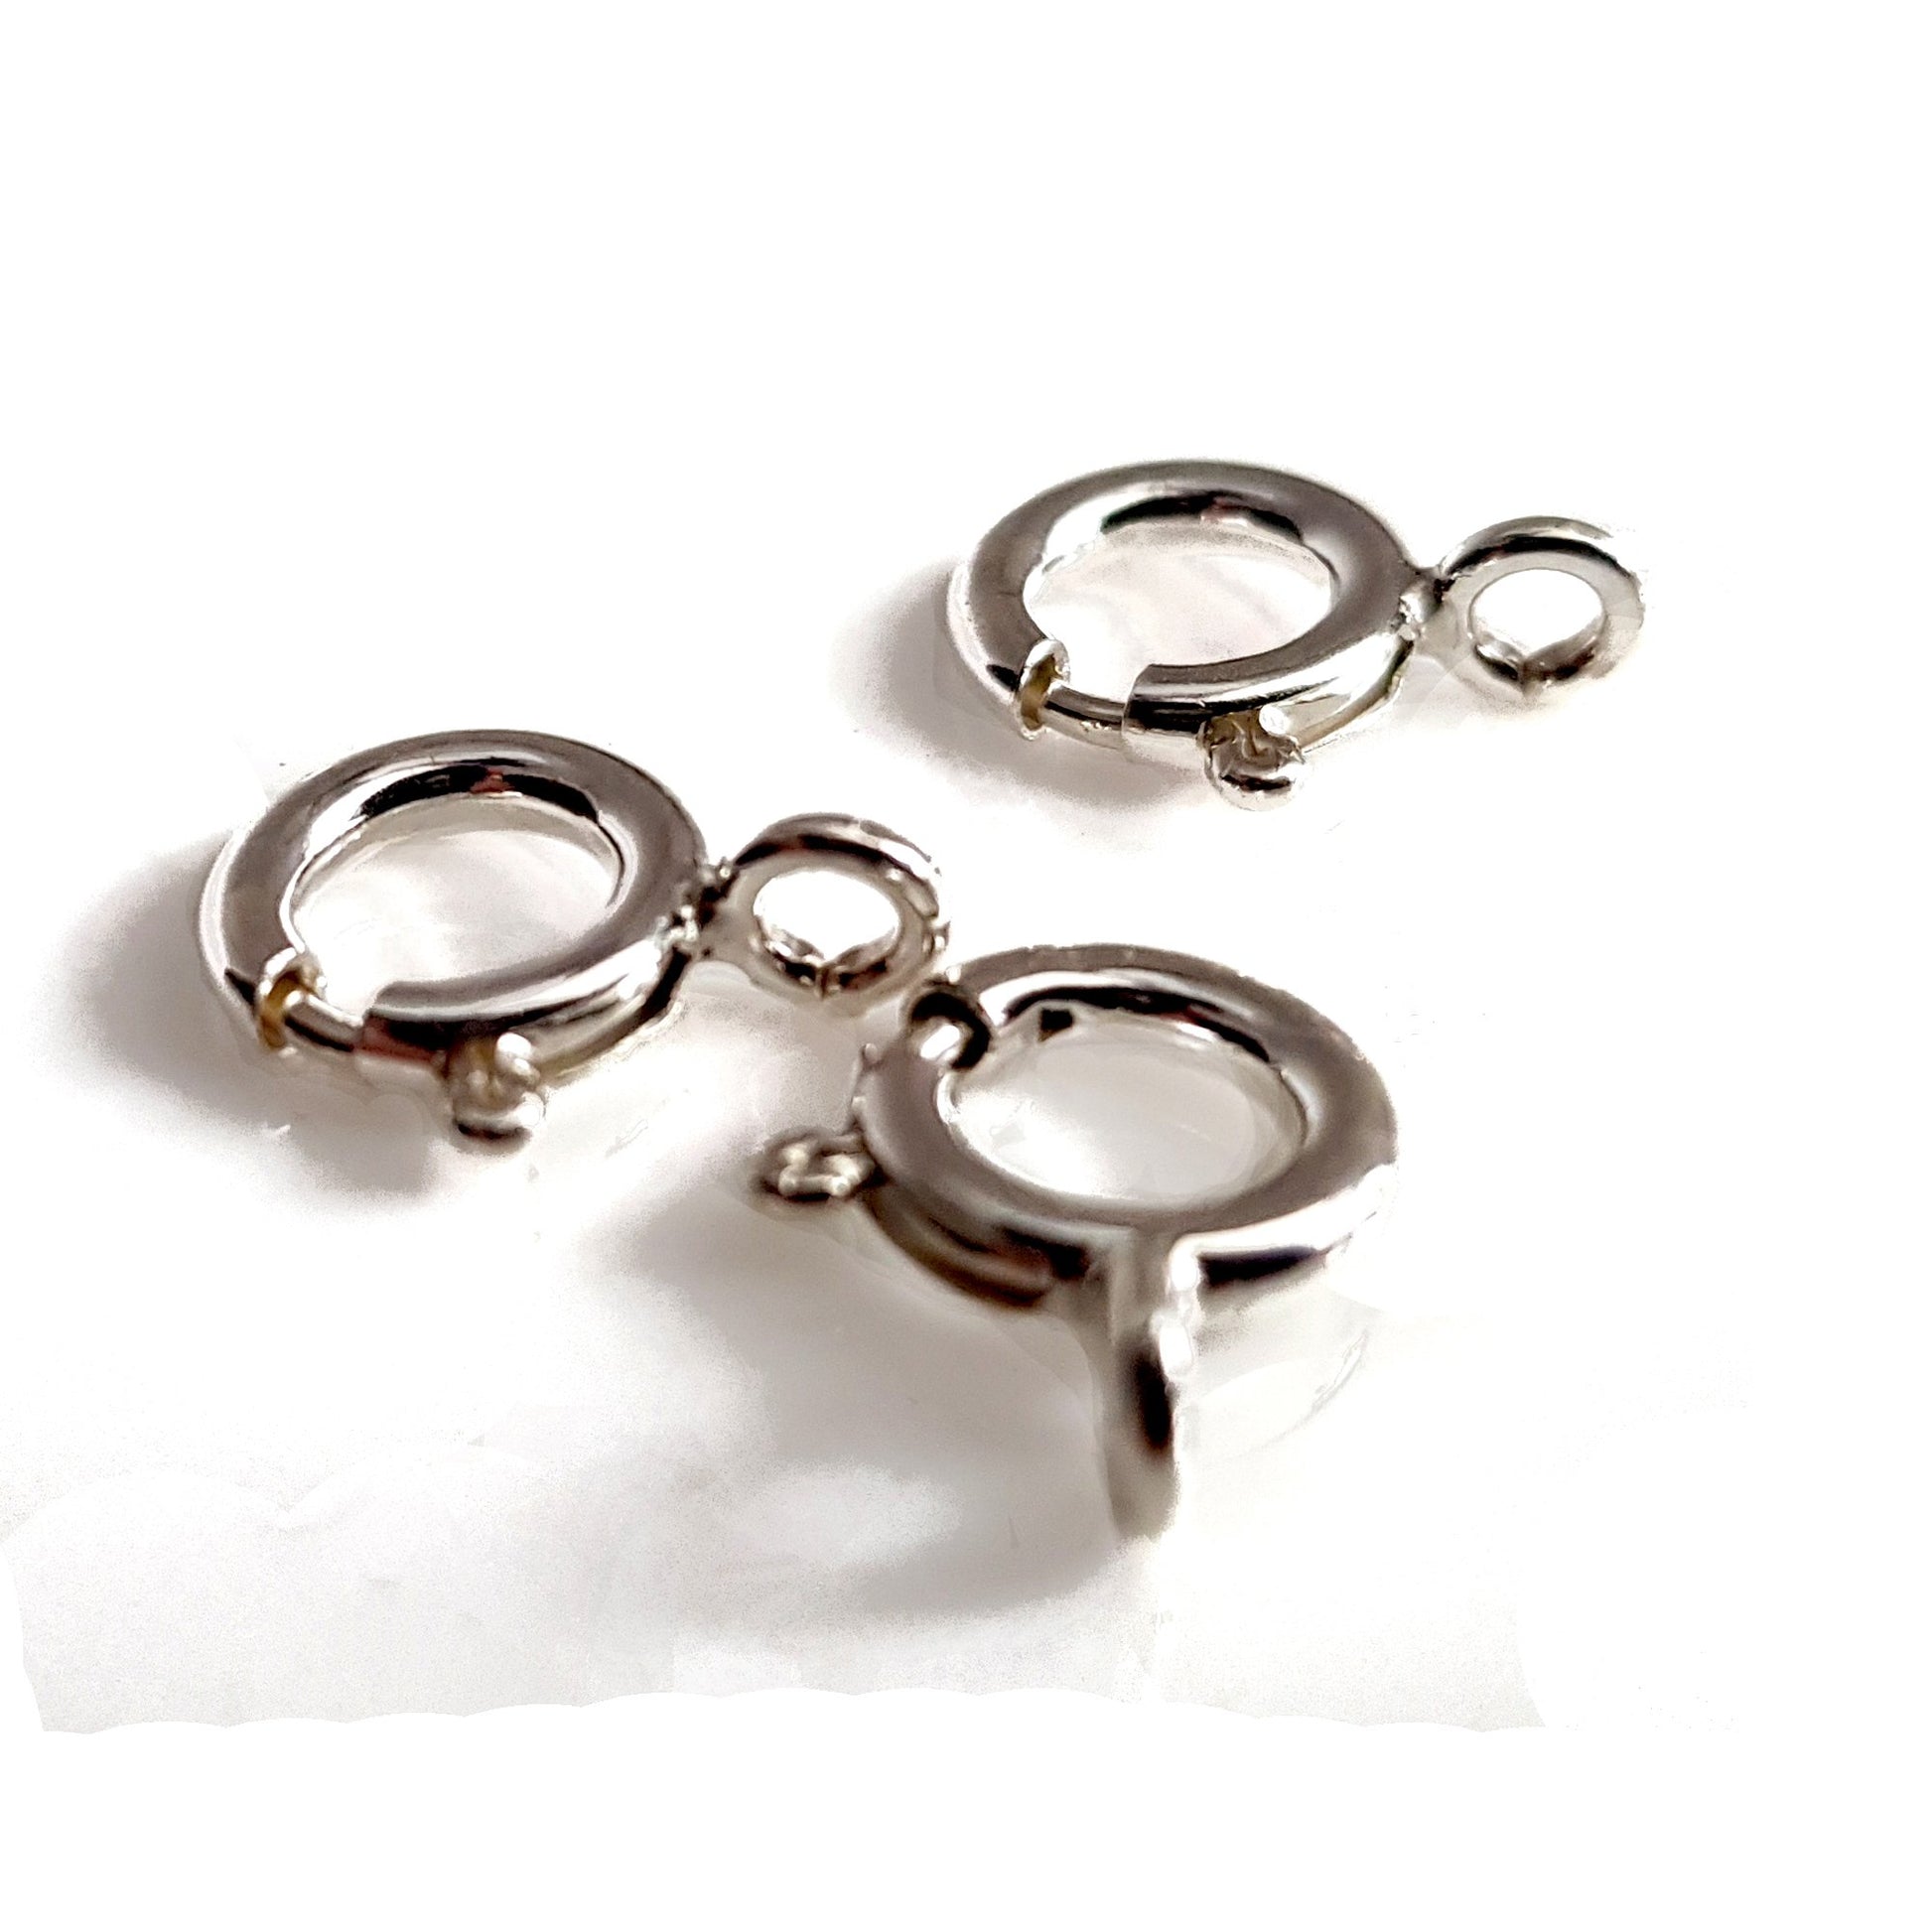 Bolt Ring Clasp 5mm Sterling Silver 3pcs | SS-022BR5 | Jewellery Supply - Kalitheo Jewellery